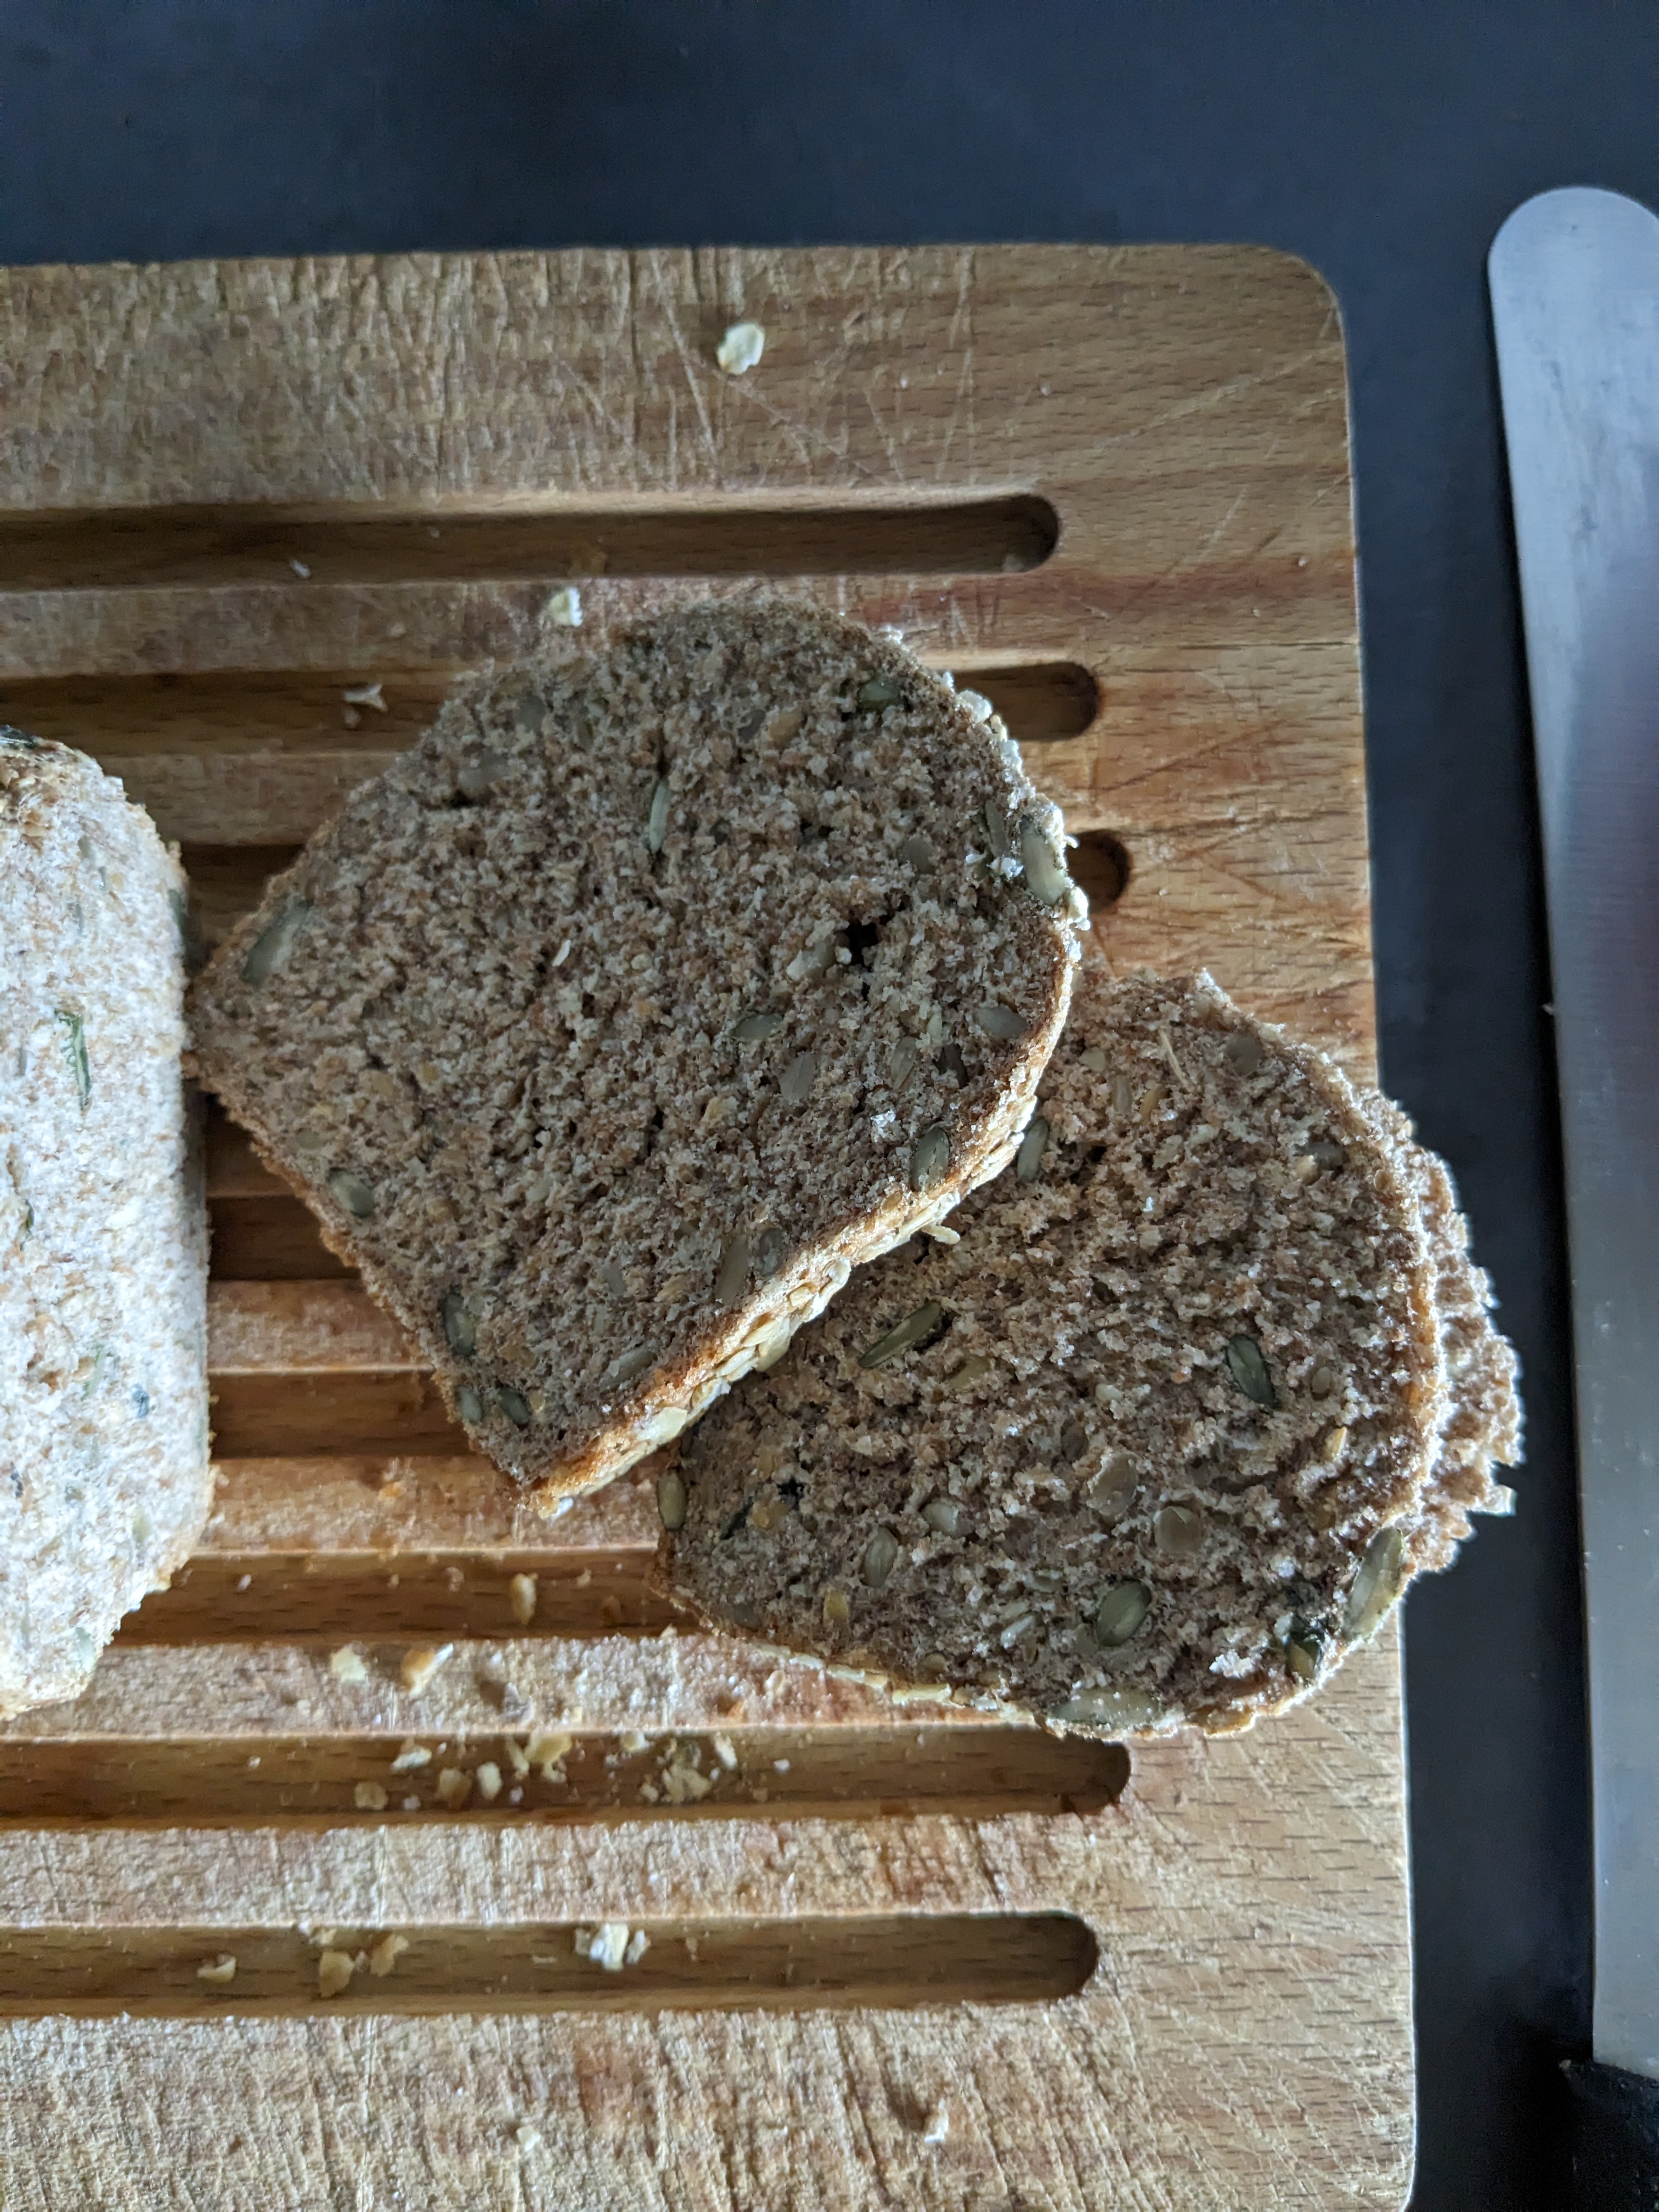 Two slices of the bread, showing the crumb